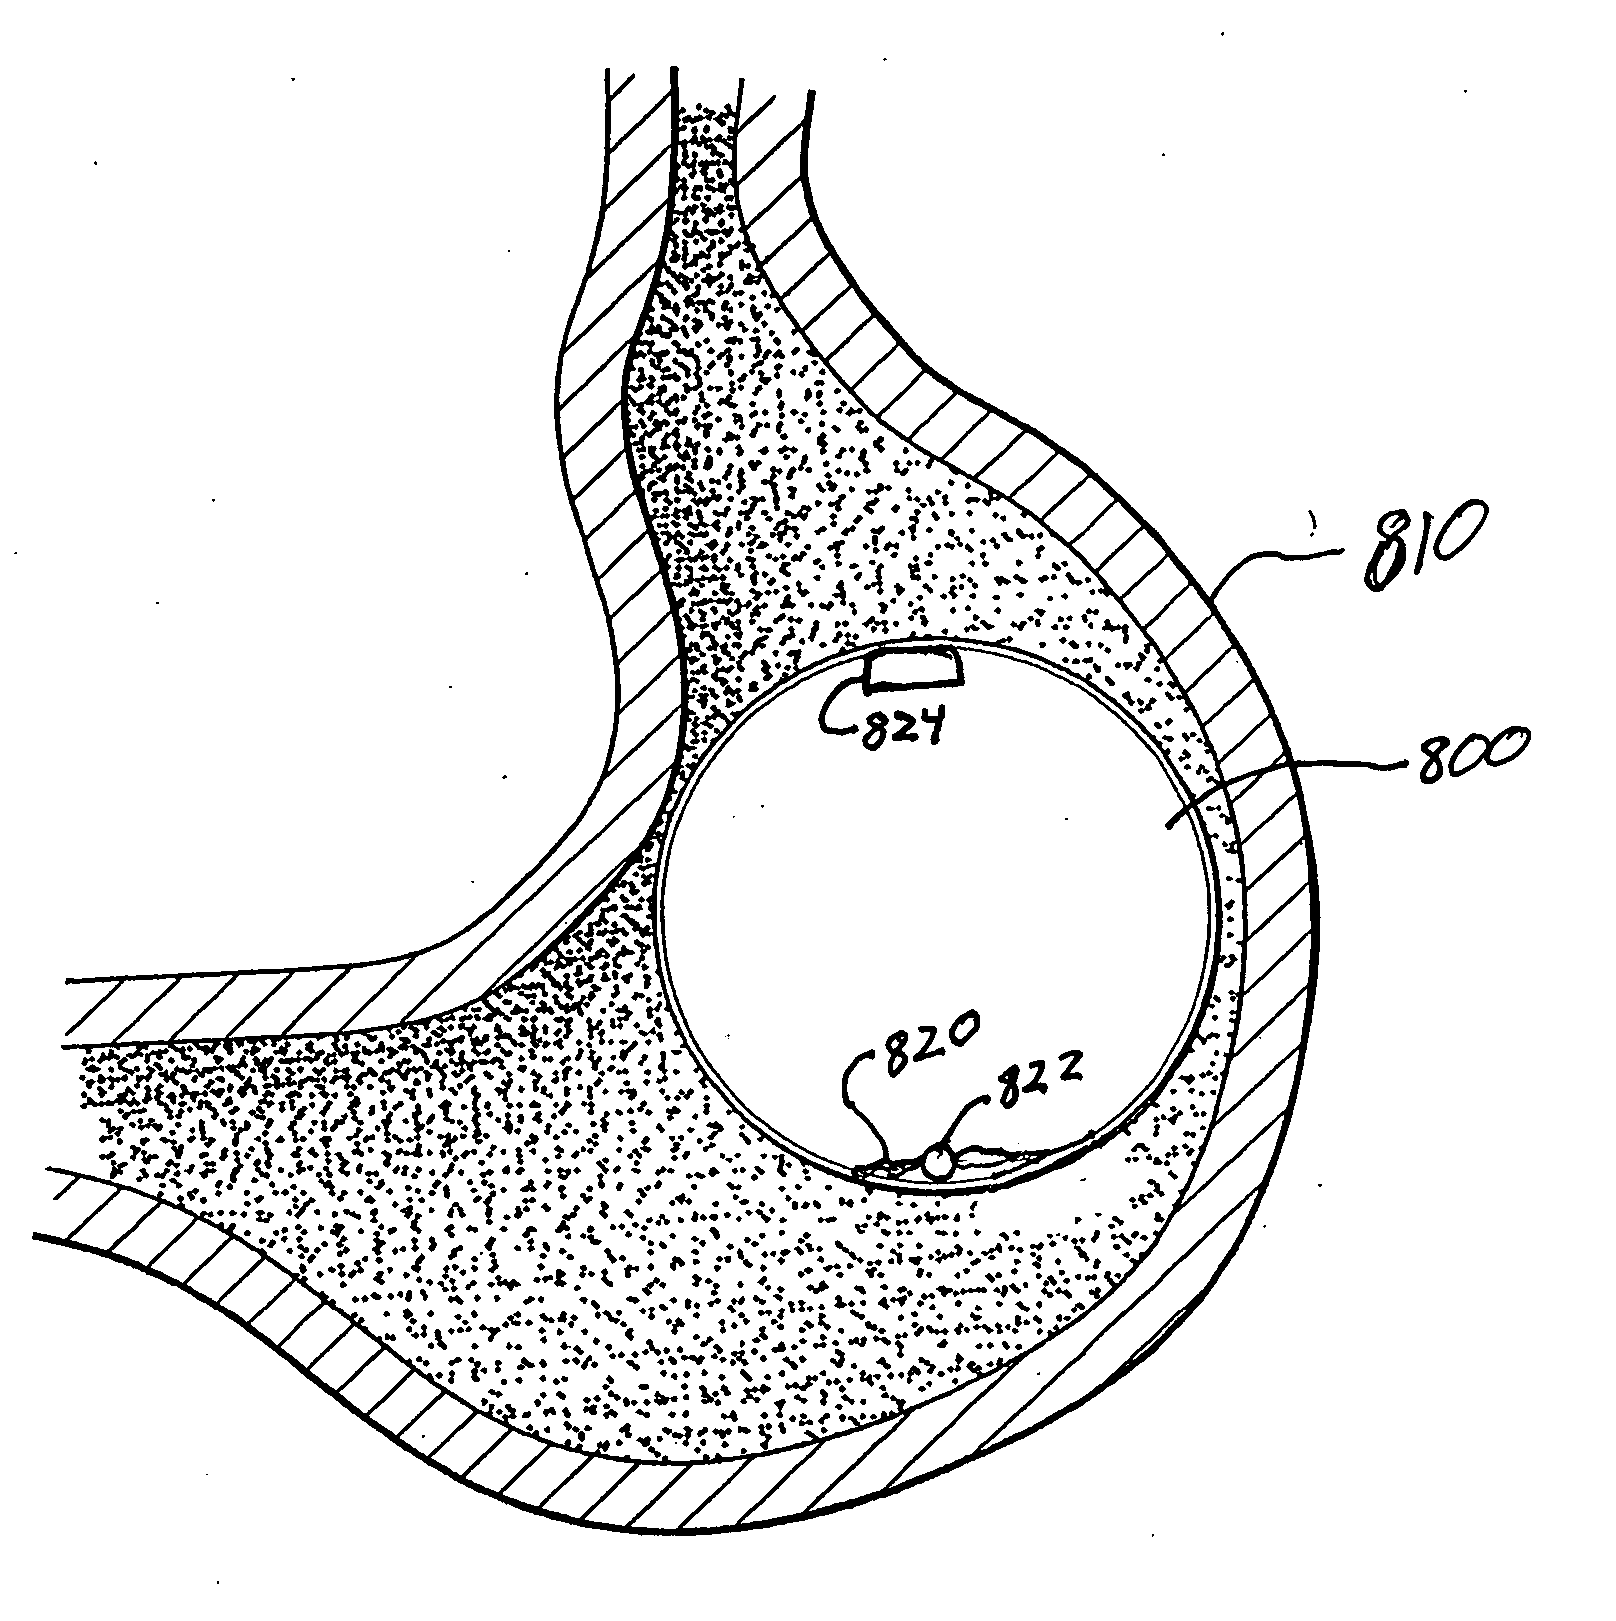 Intragastric volume-occupying device